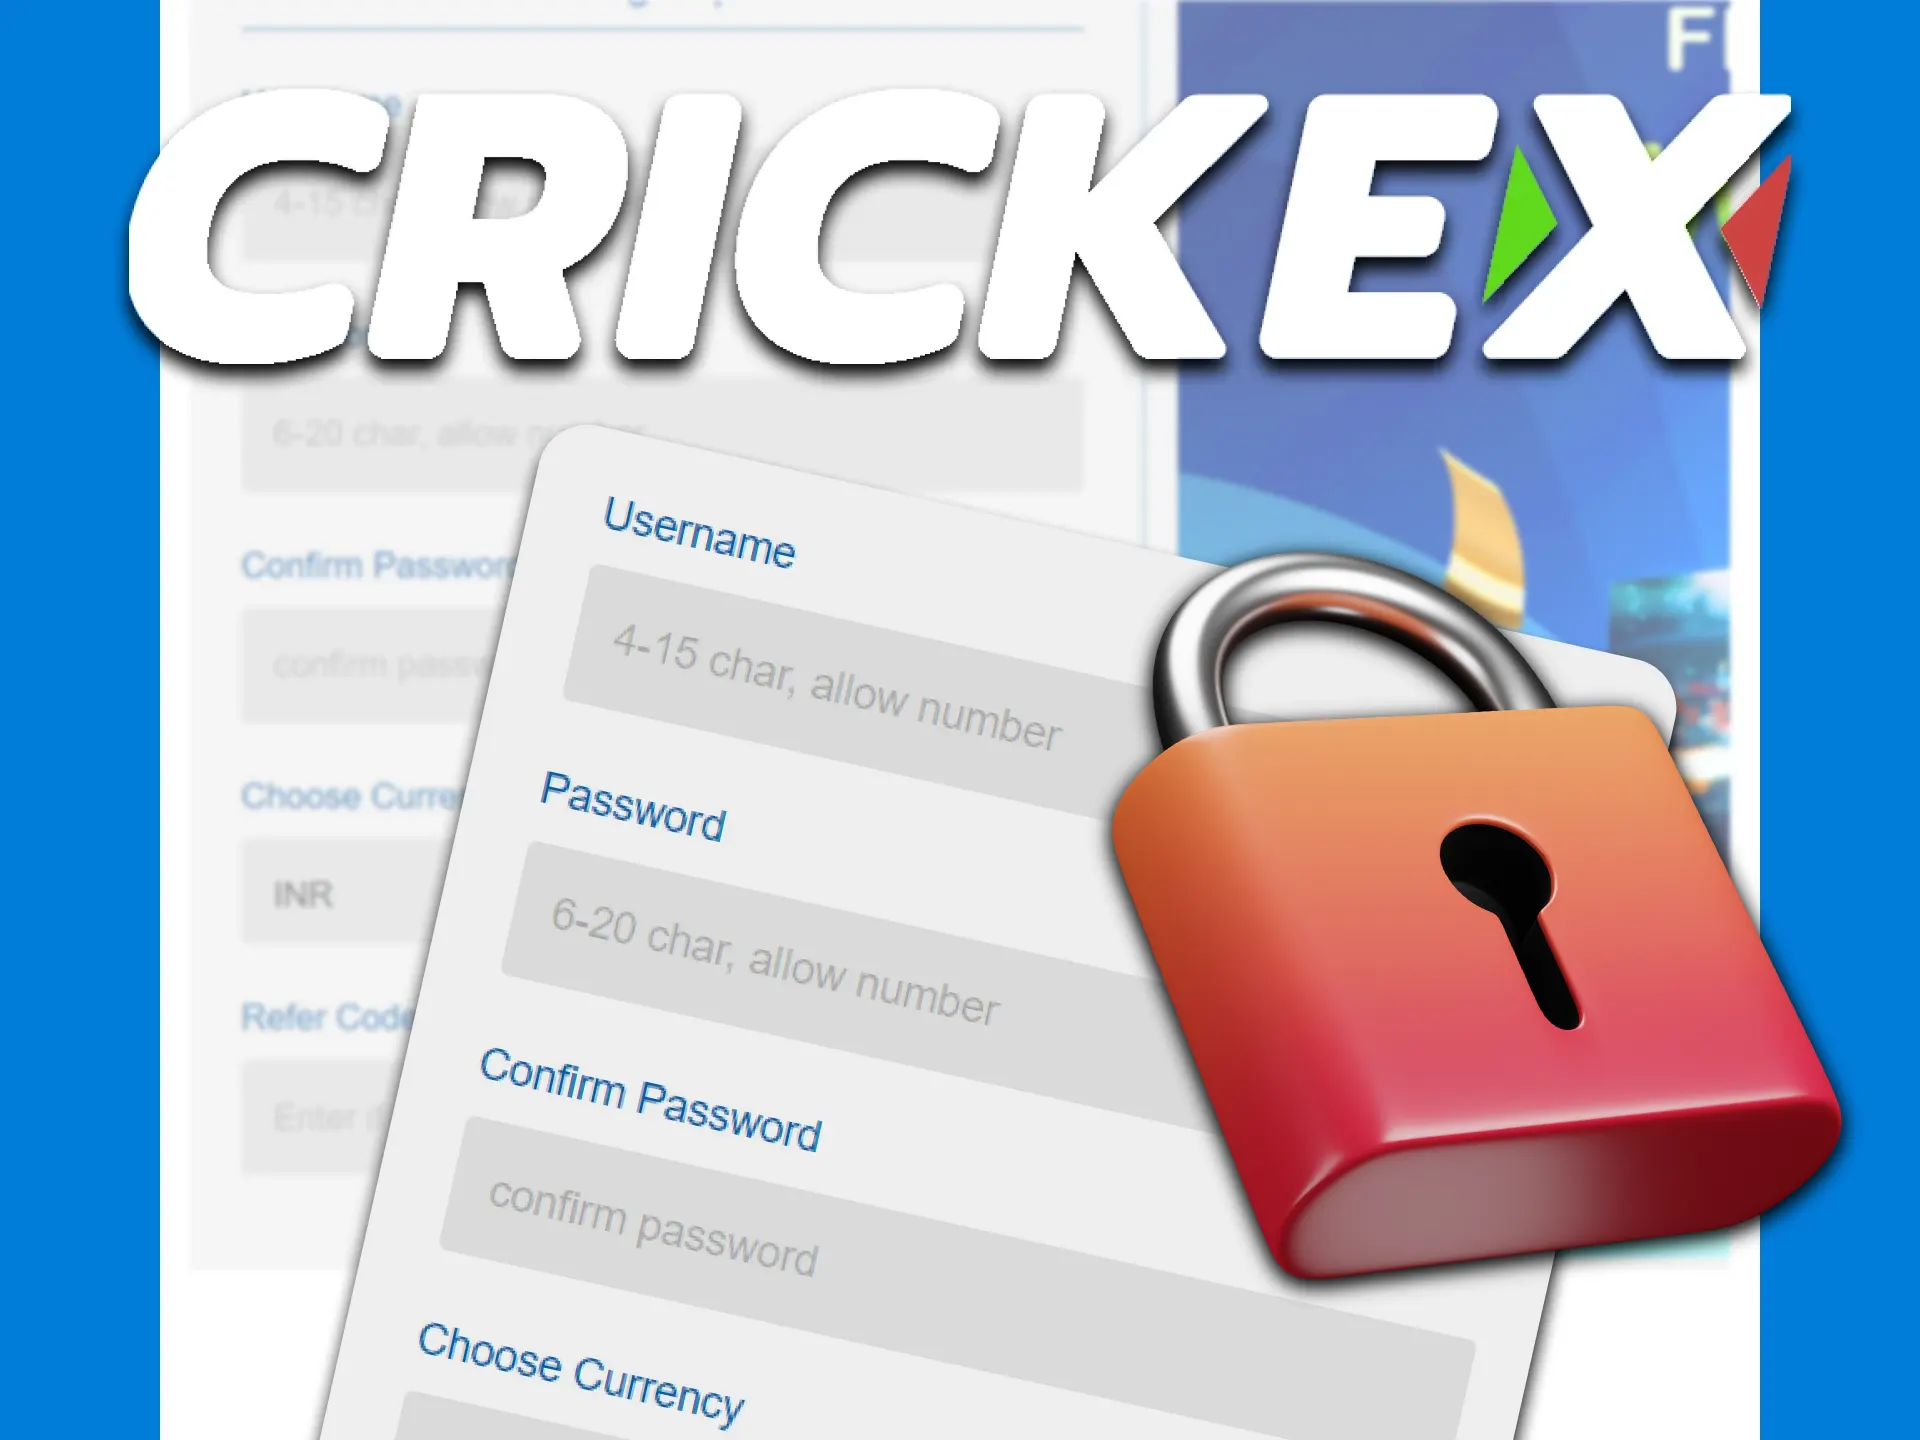 Your personal data is protected by the Crickex service.